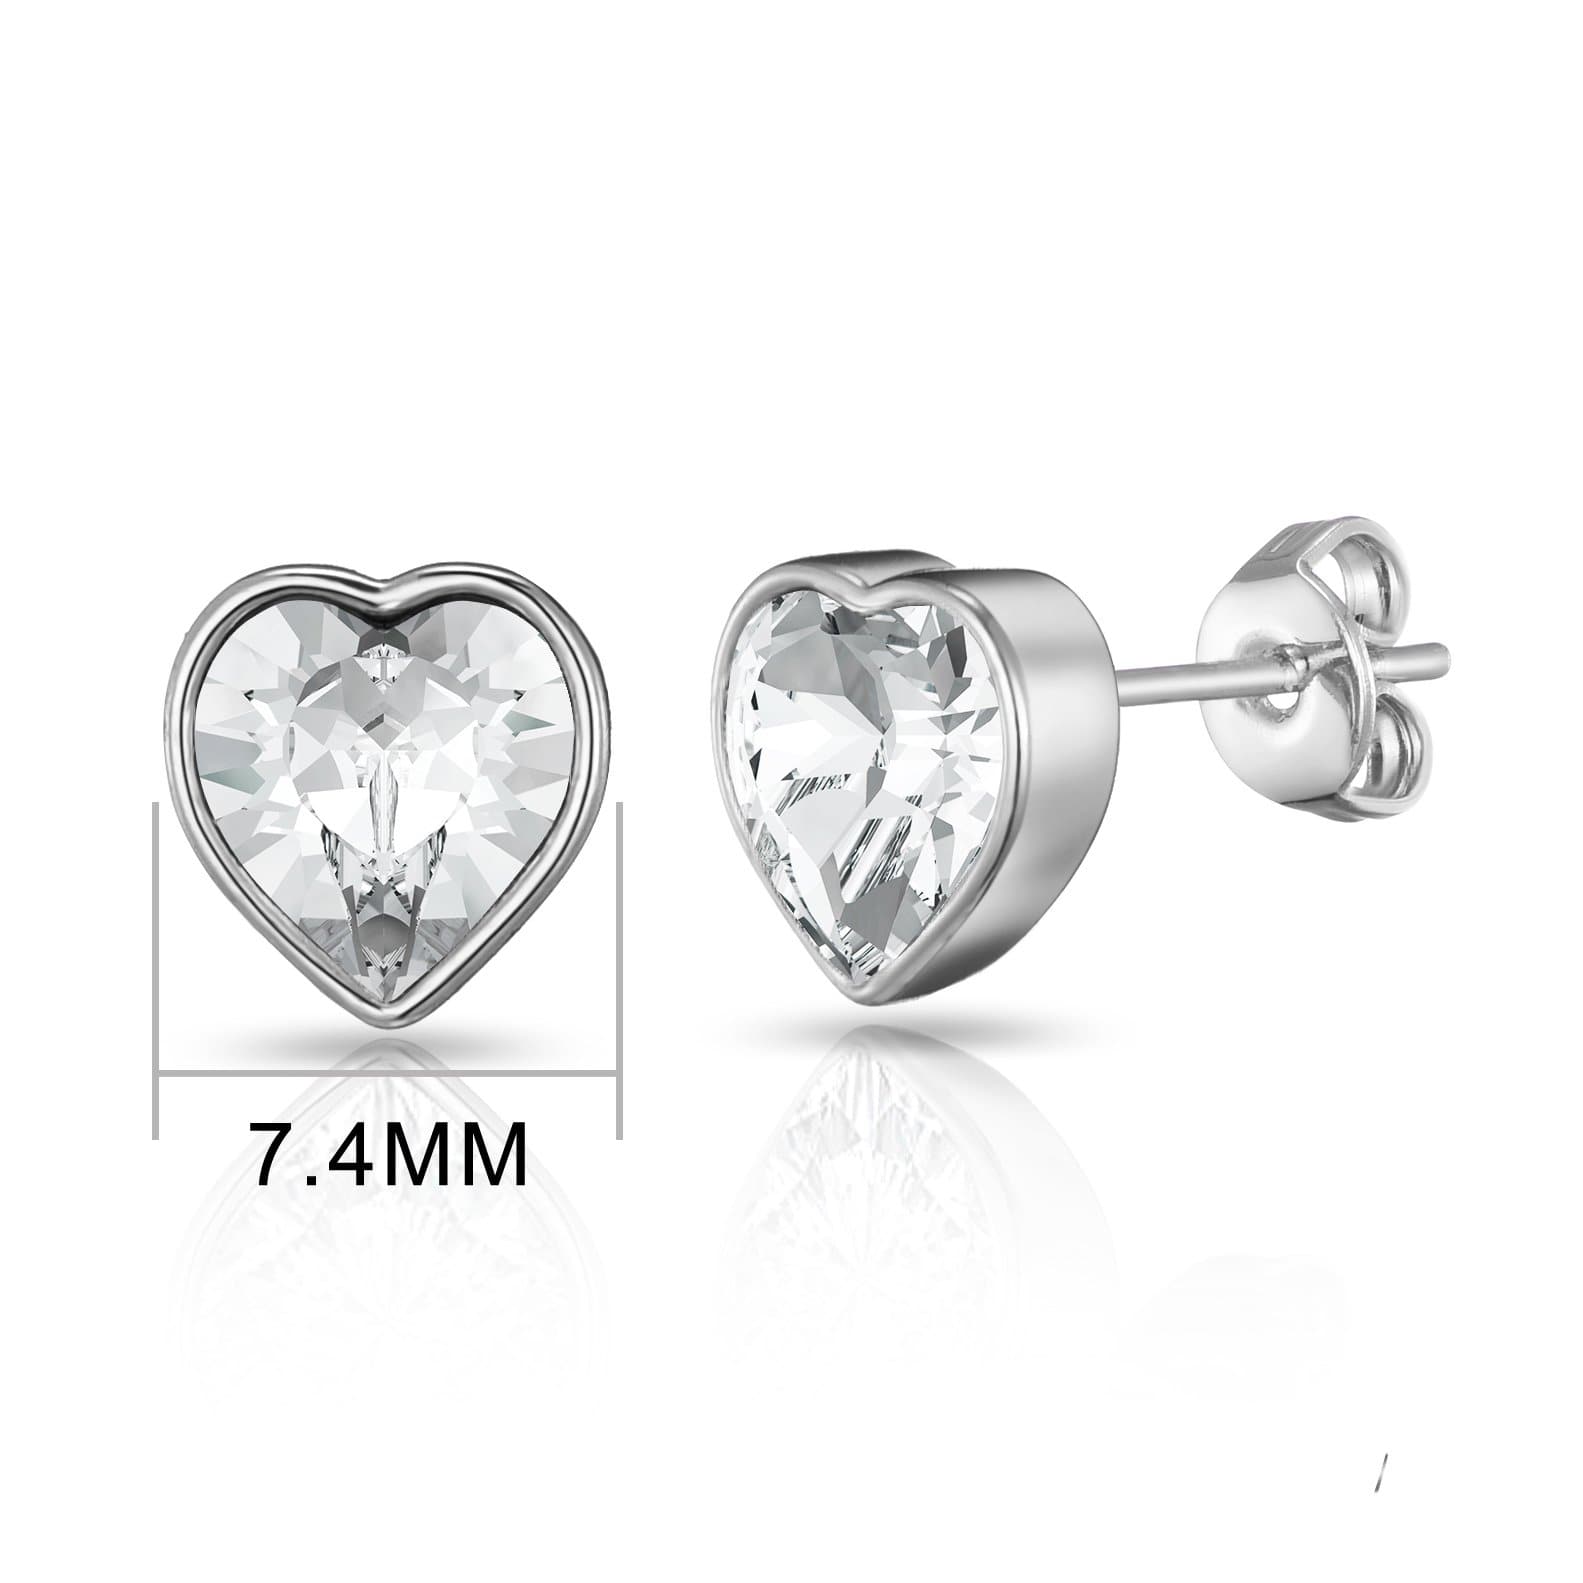 Silver Plated Bezel set Heart Earrings Created with Zircondia® Crystals